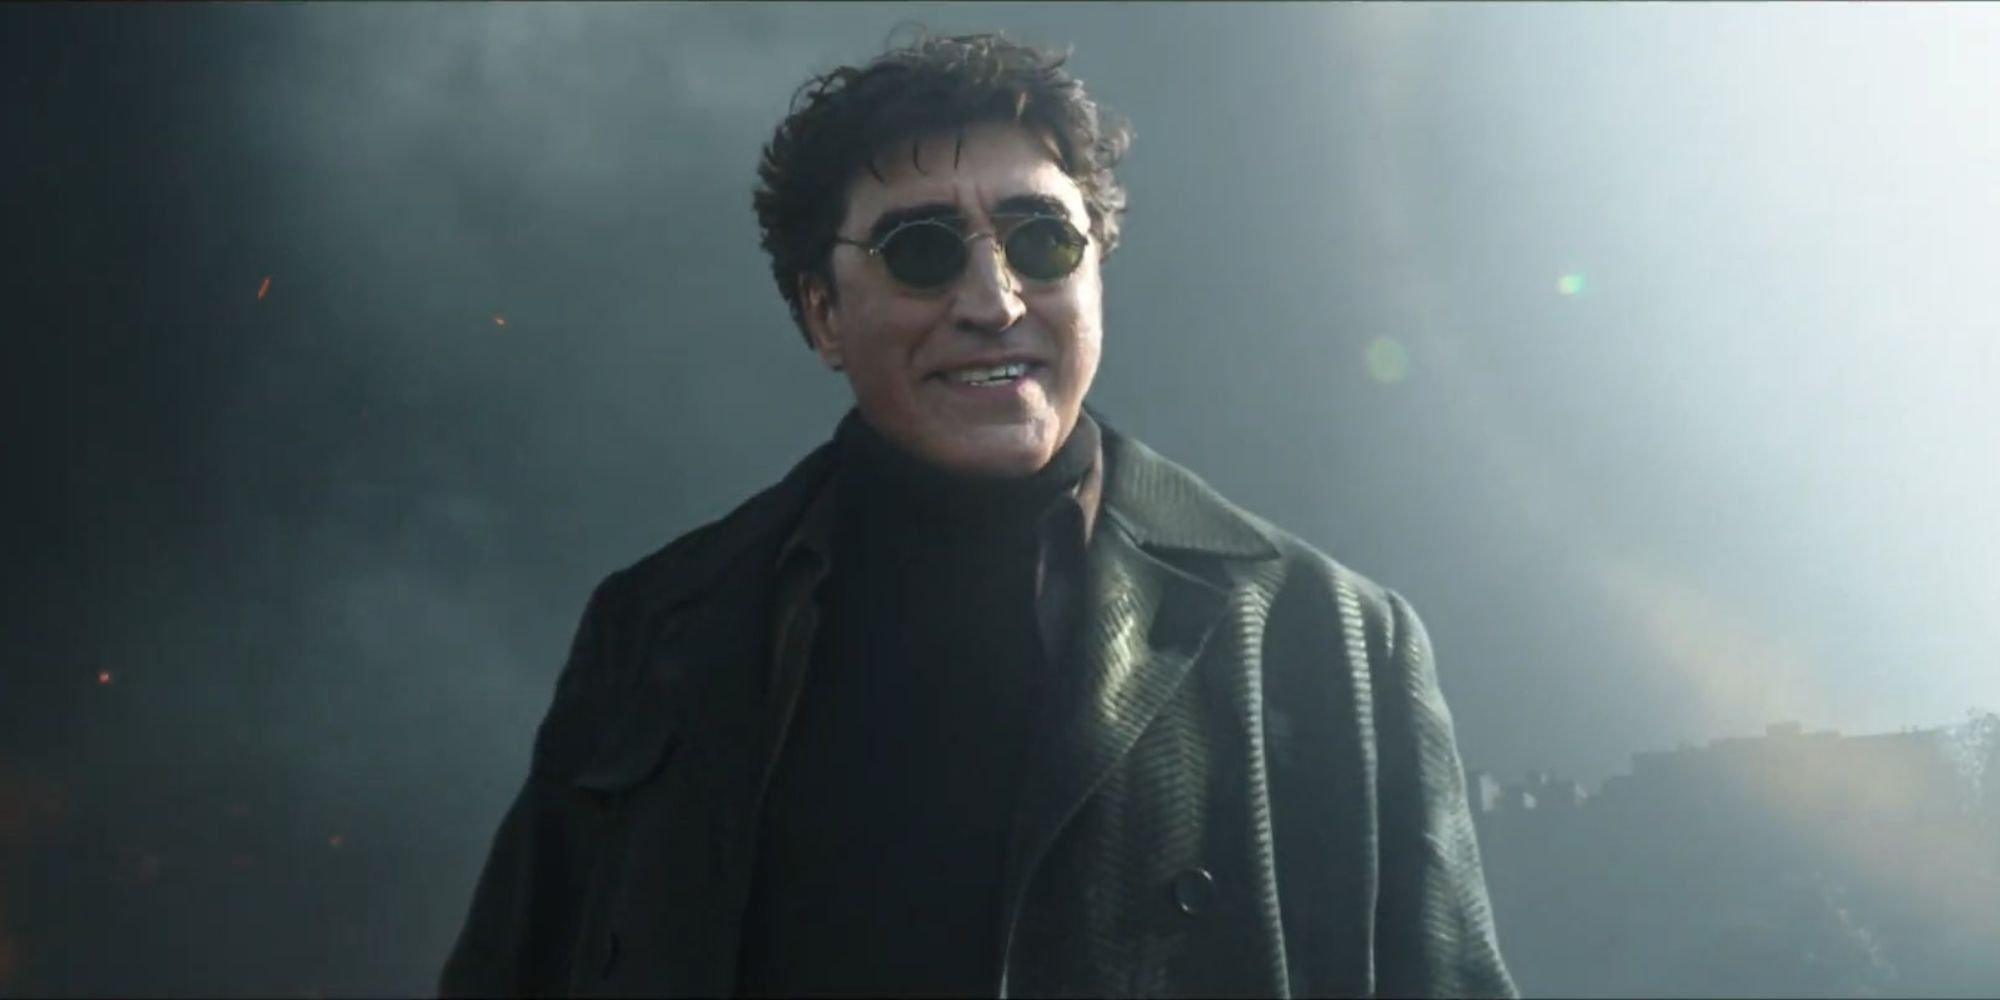 Alfred Molina as Doctor Octopus in 'Spider-Man: No Way Home'